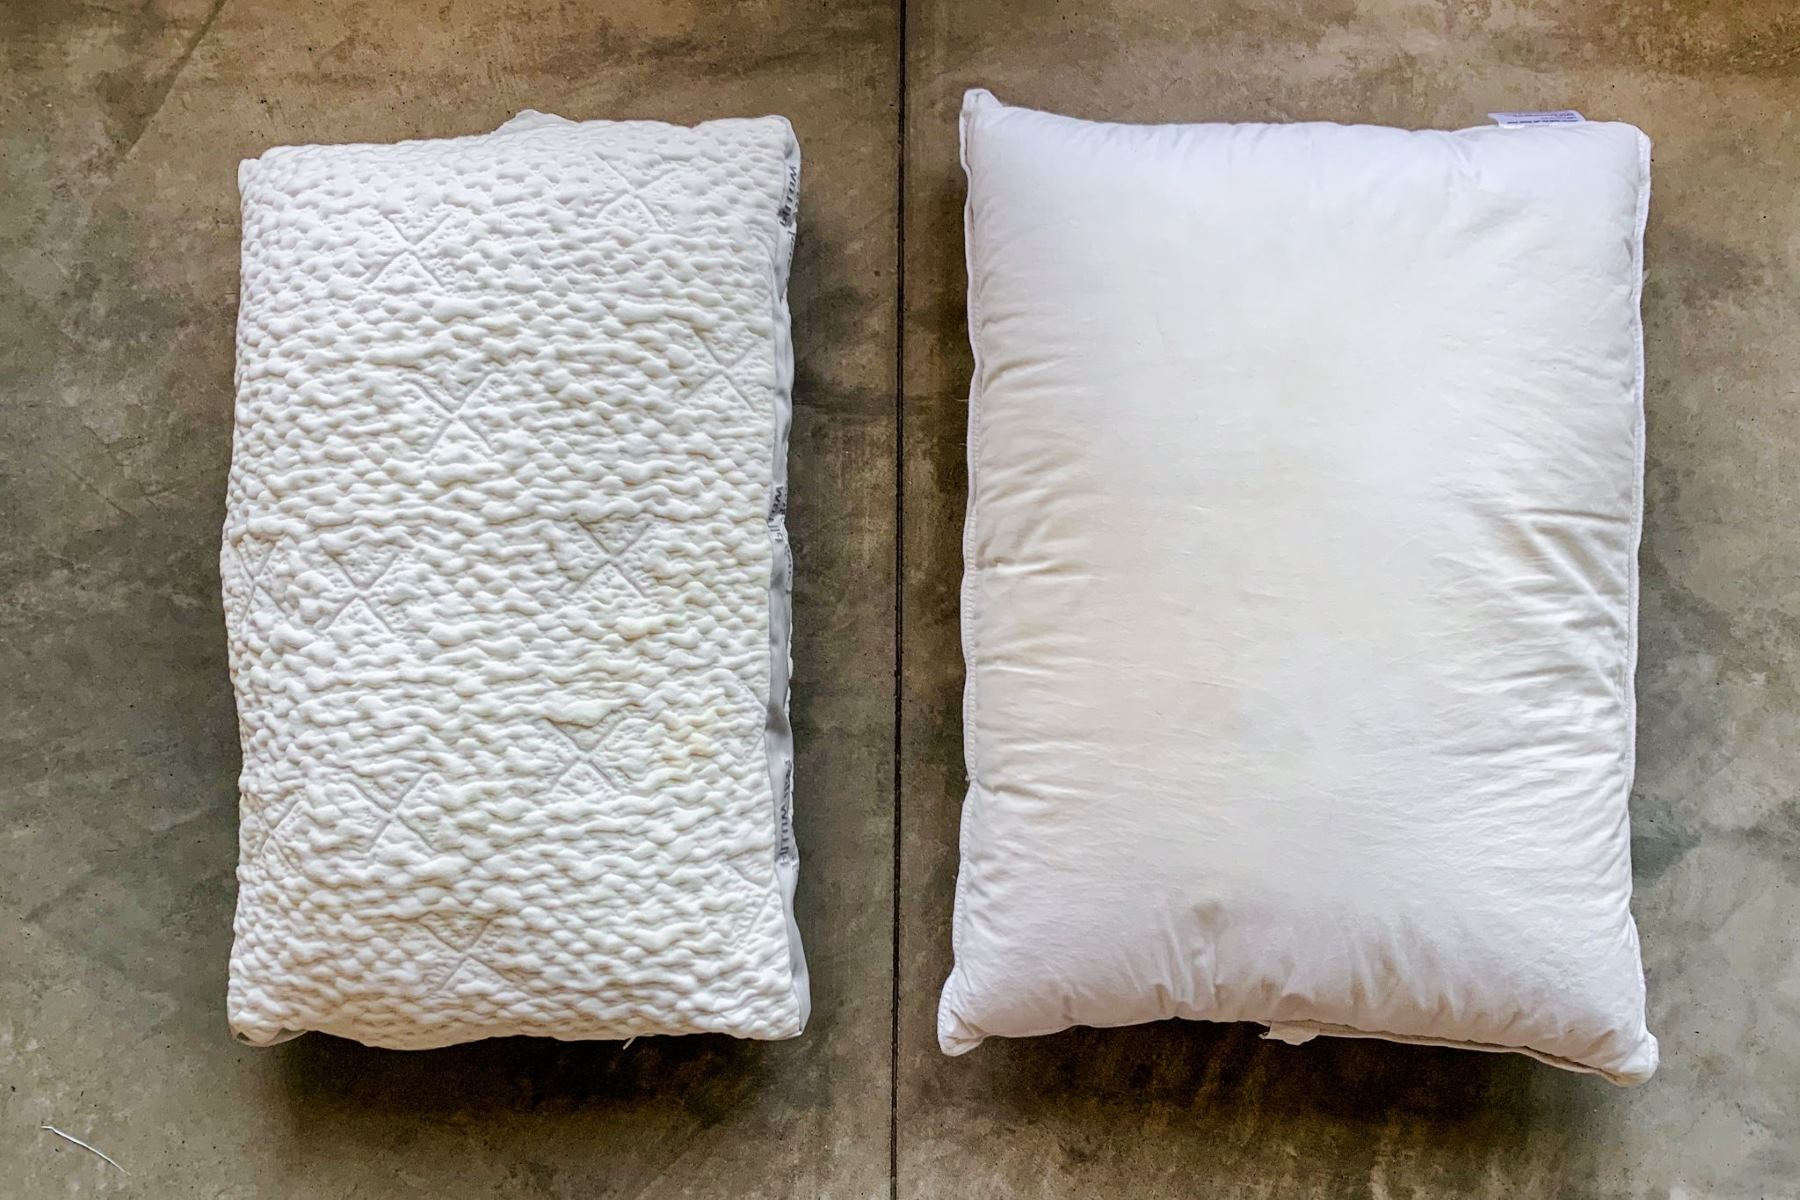 How To Clean Pillows Without A Washing Machine